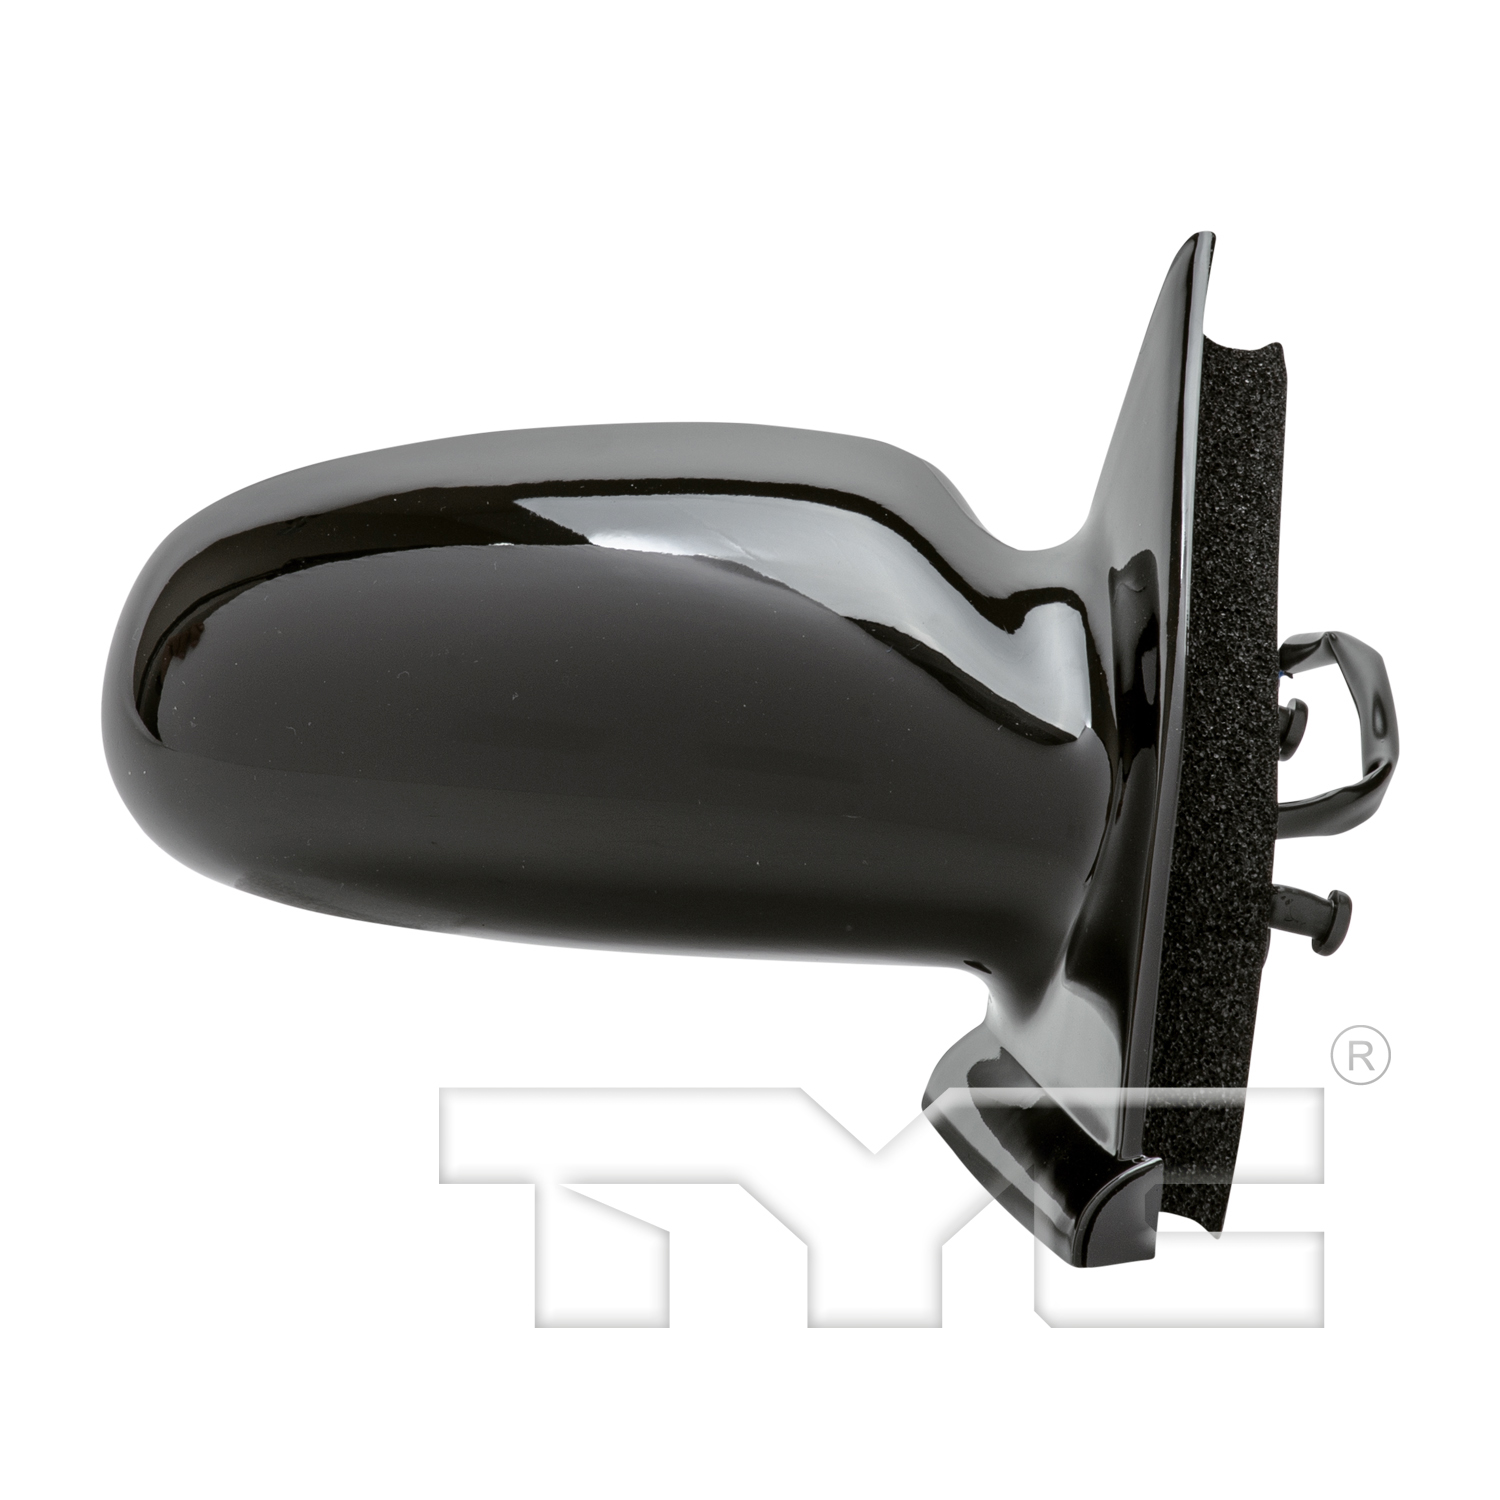 Aftermarket MIRRORS for SATURN - SL1, SL1,96-02,RT Mirror outside rear view